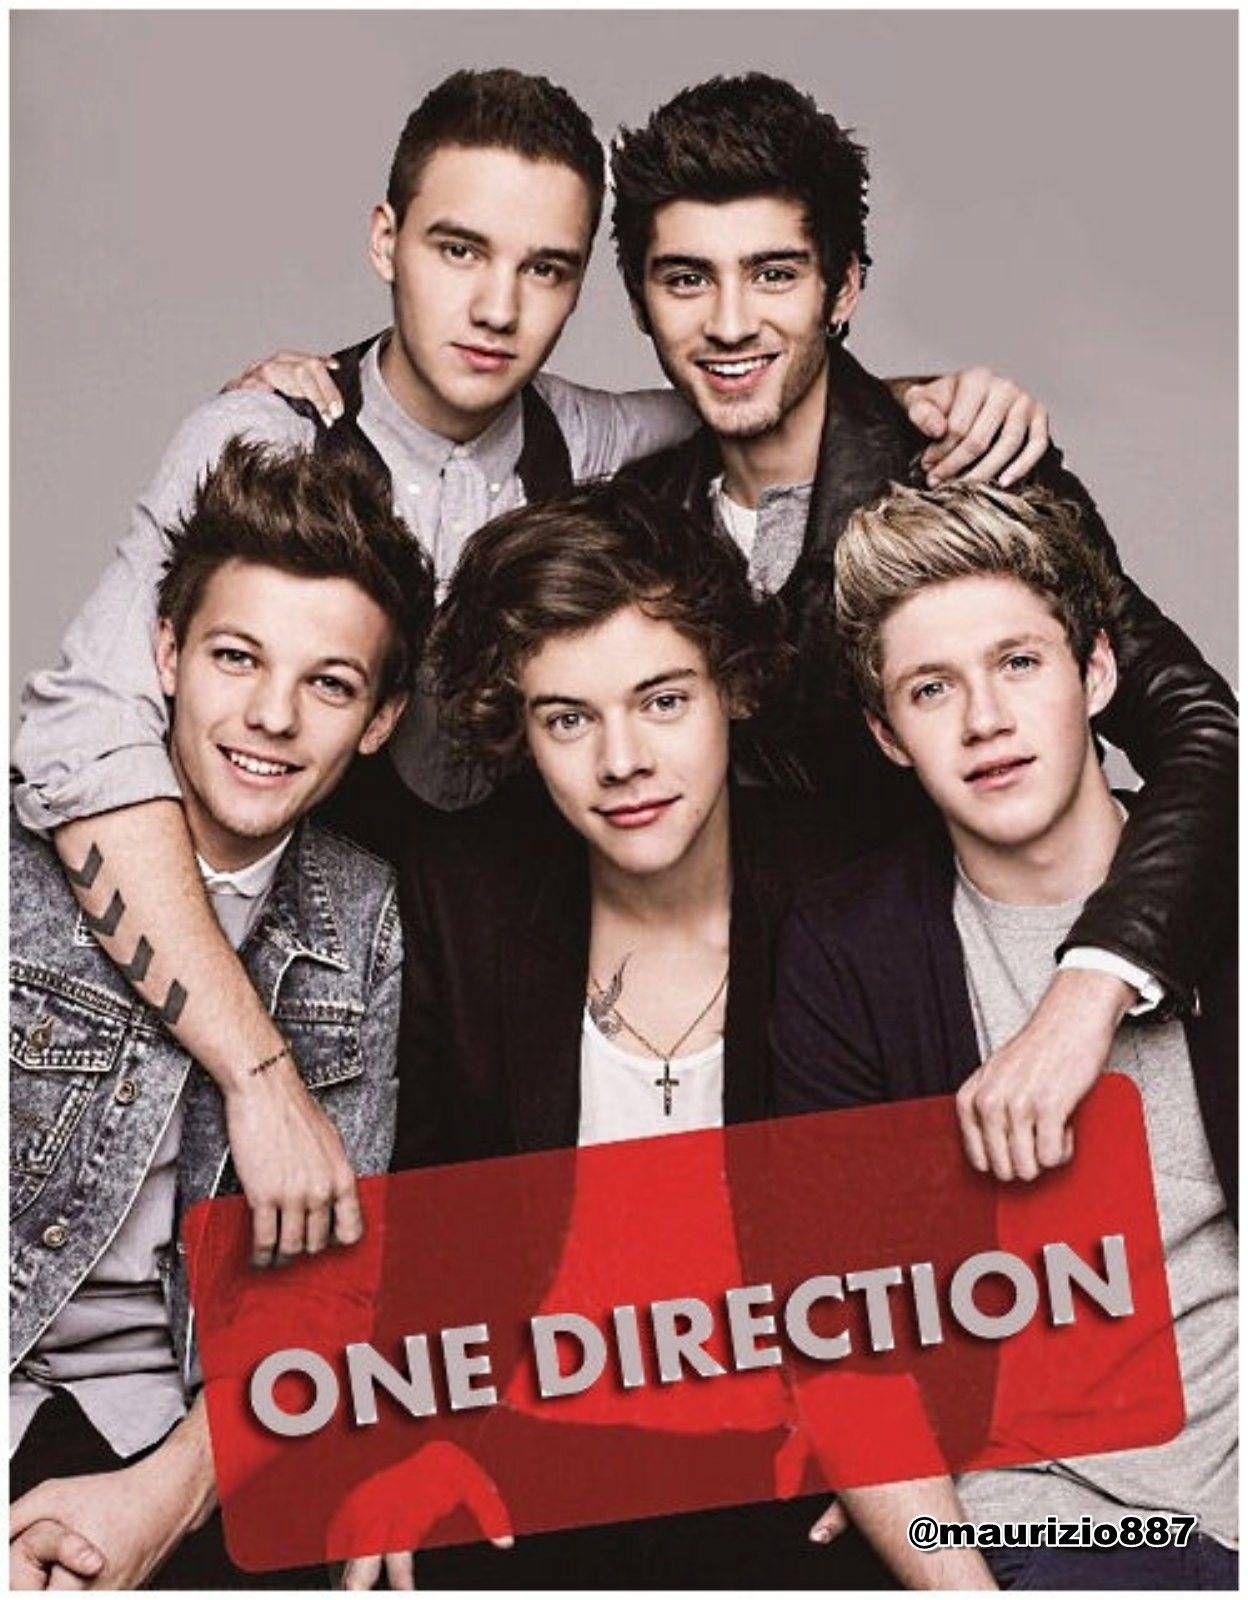 One Direction Computer Wallpaper. One direction photohoot, One direction logo, One direction 2014